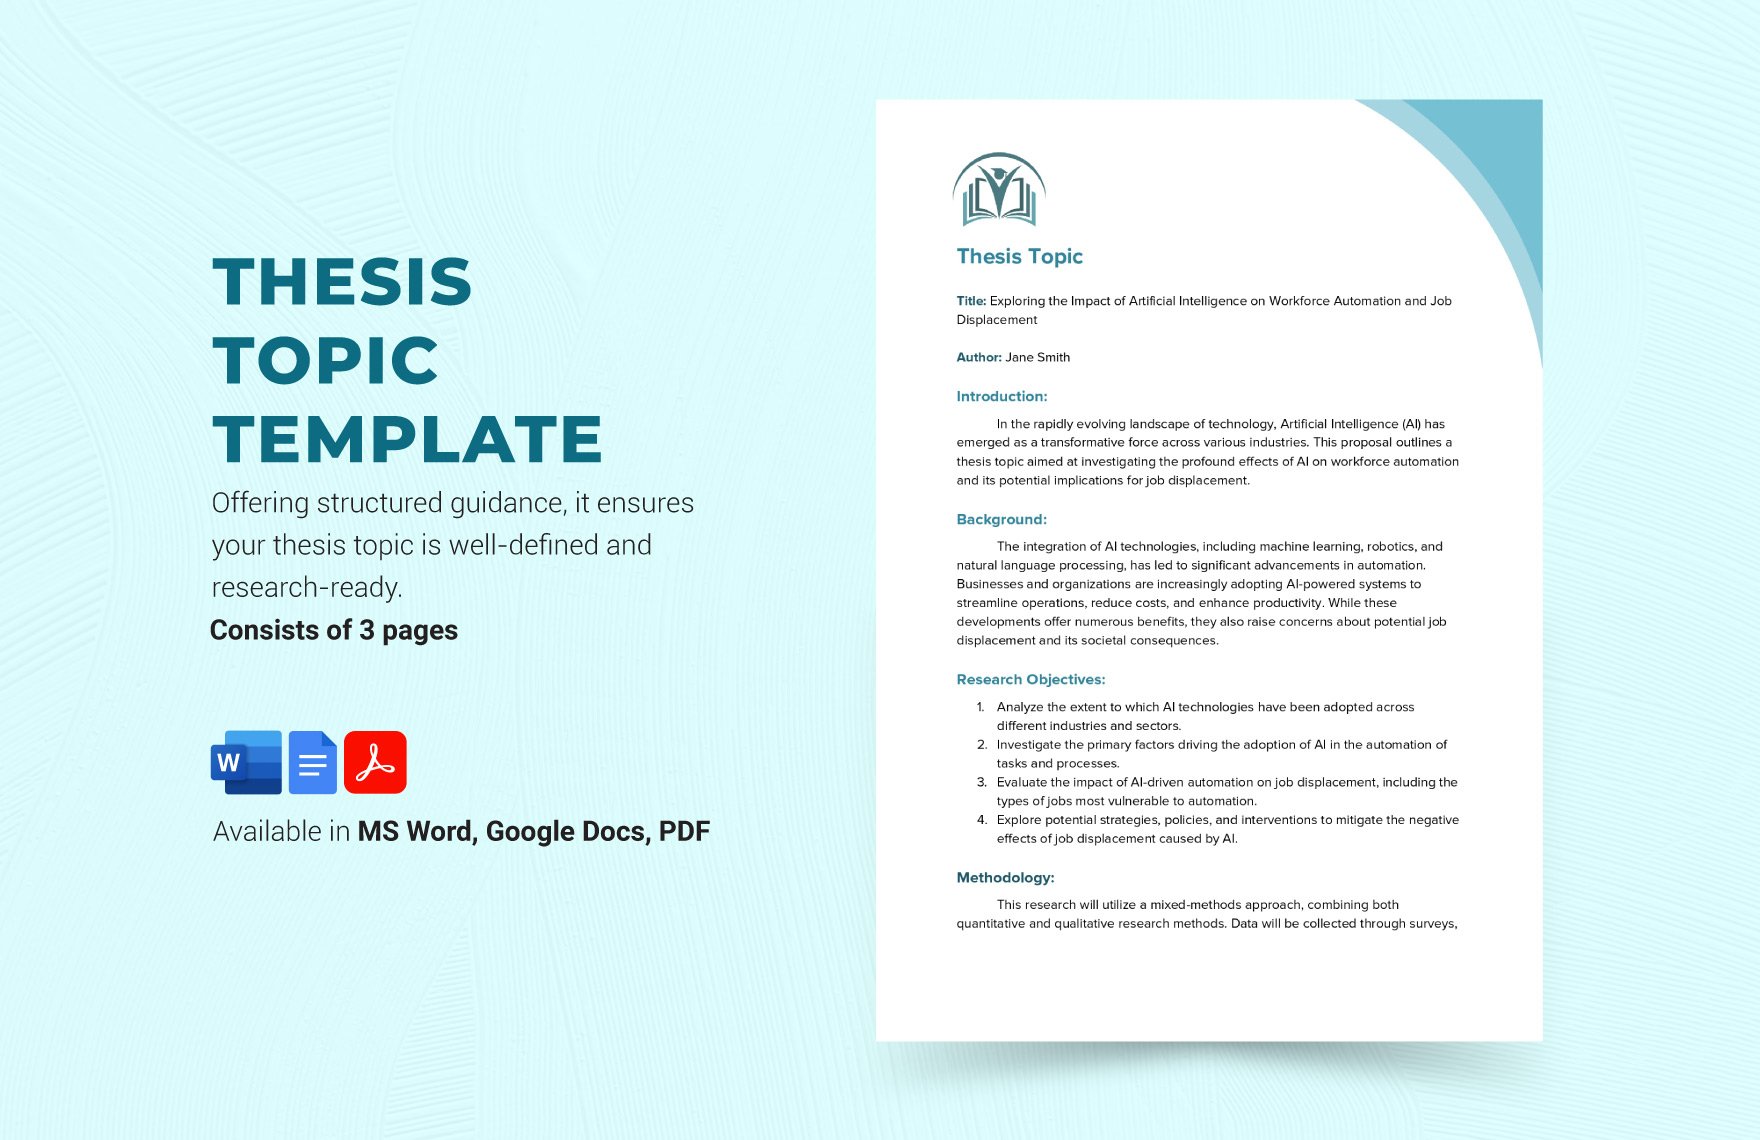 Thesis Topic Template